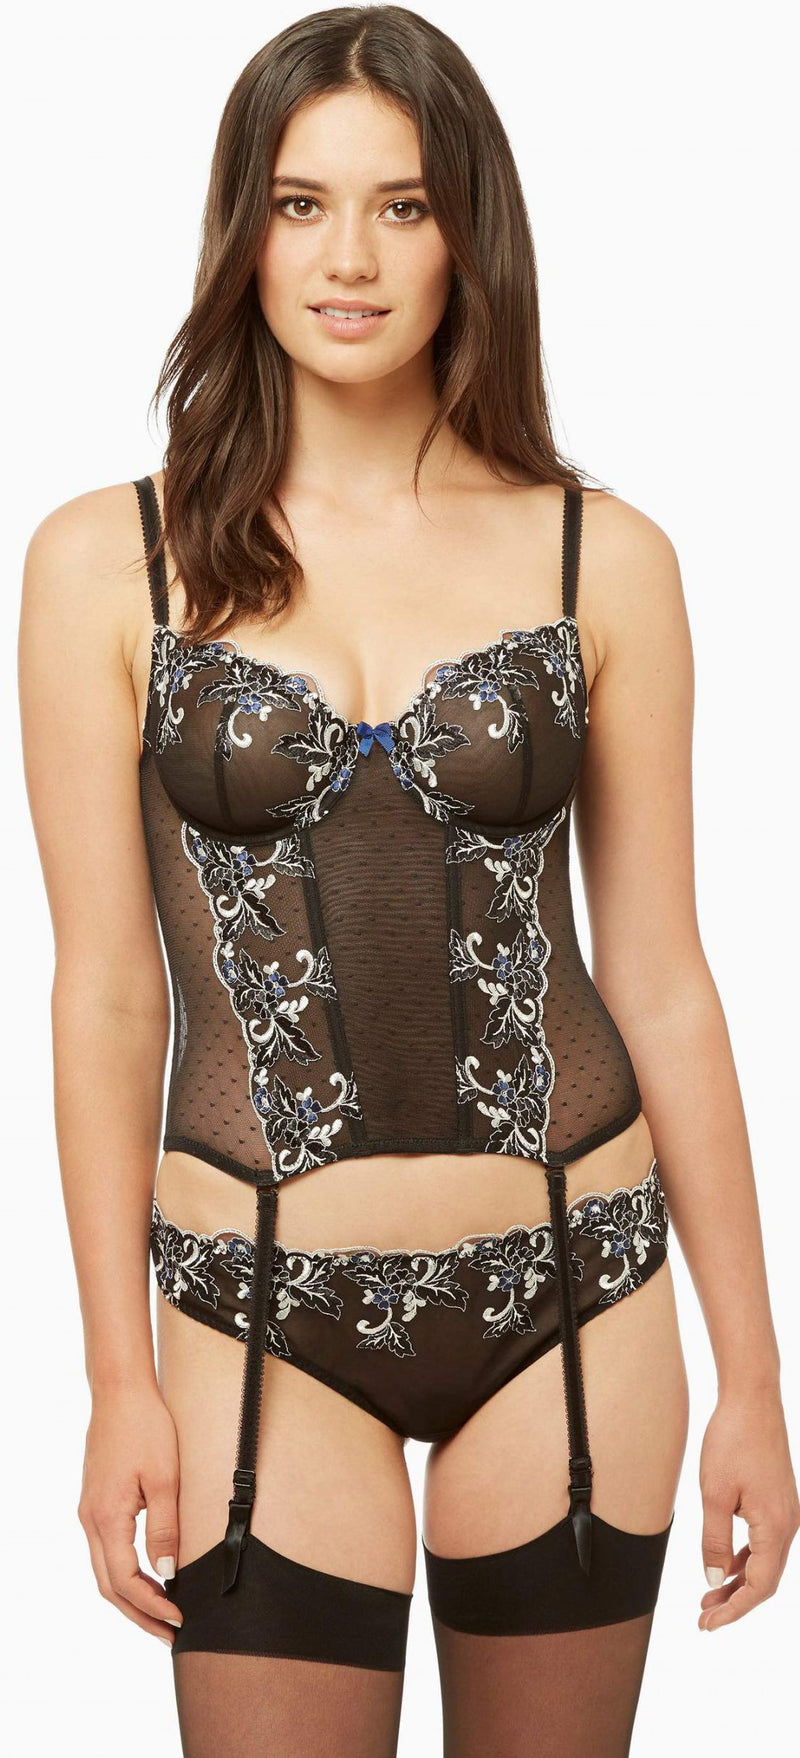 Blush Lingerie's new corset has to be seen to be truly appreciated. Check out the ultimate, sexy Midnight Garden demi corset with garters and a thong.